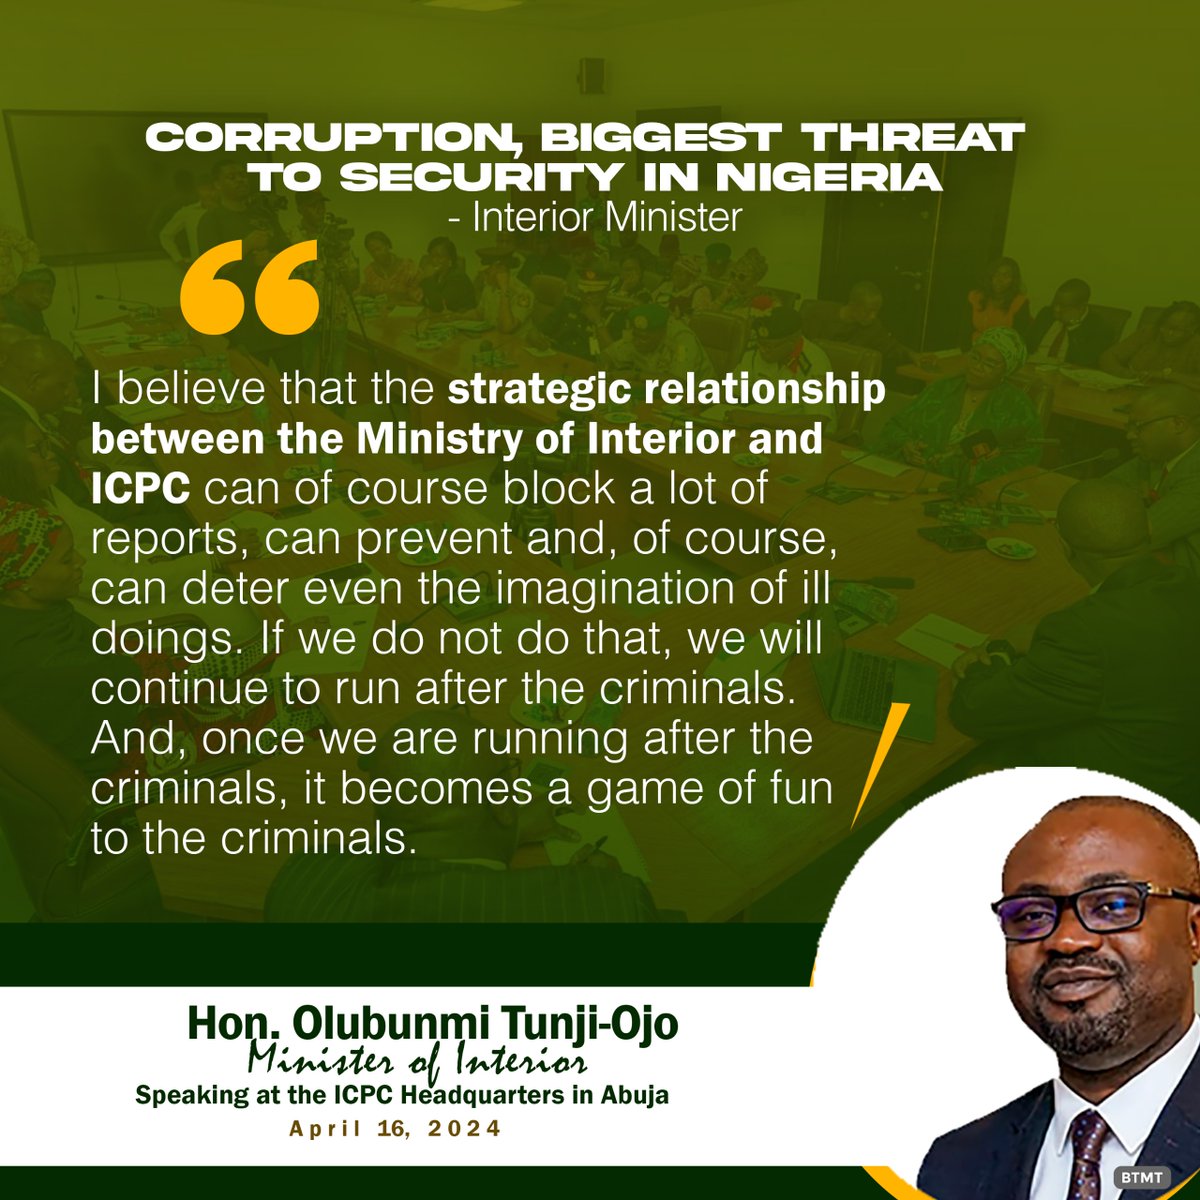 His Excellency, Olubunmi Tunji-Ojo, the minister of interior has spoken. he who has ears let him hear